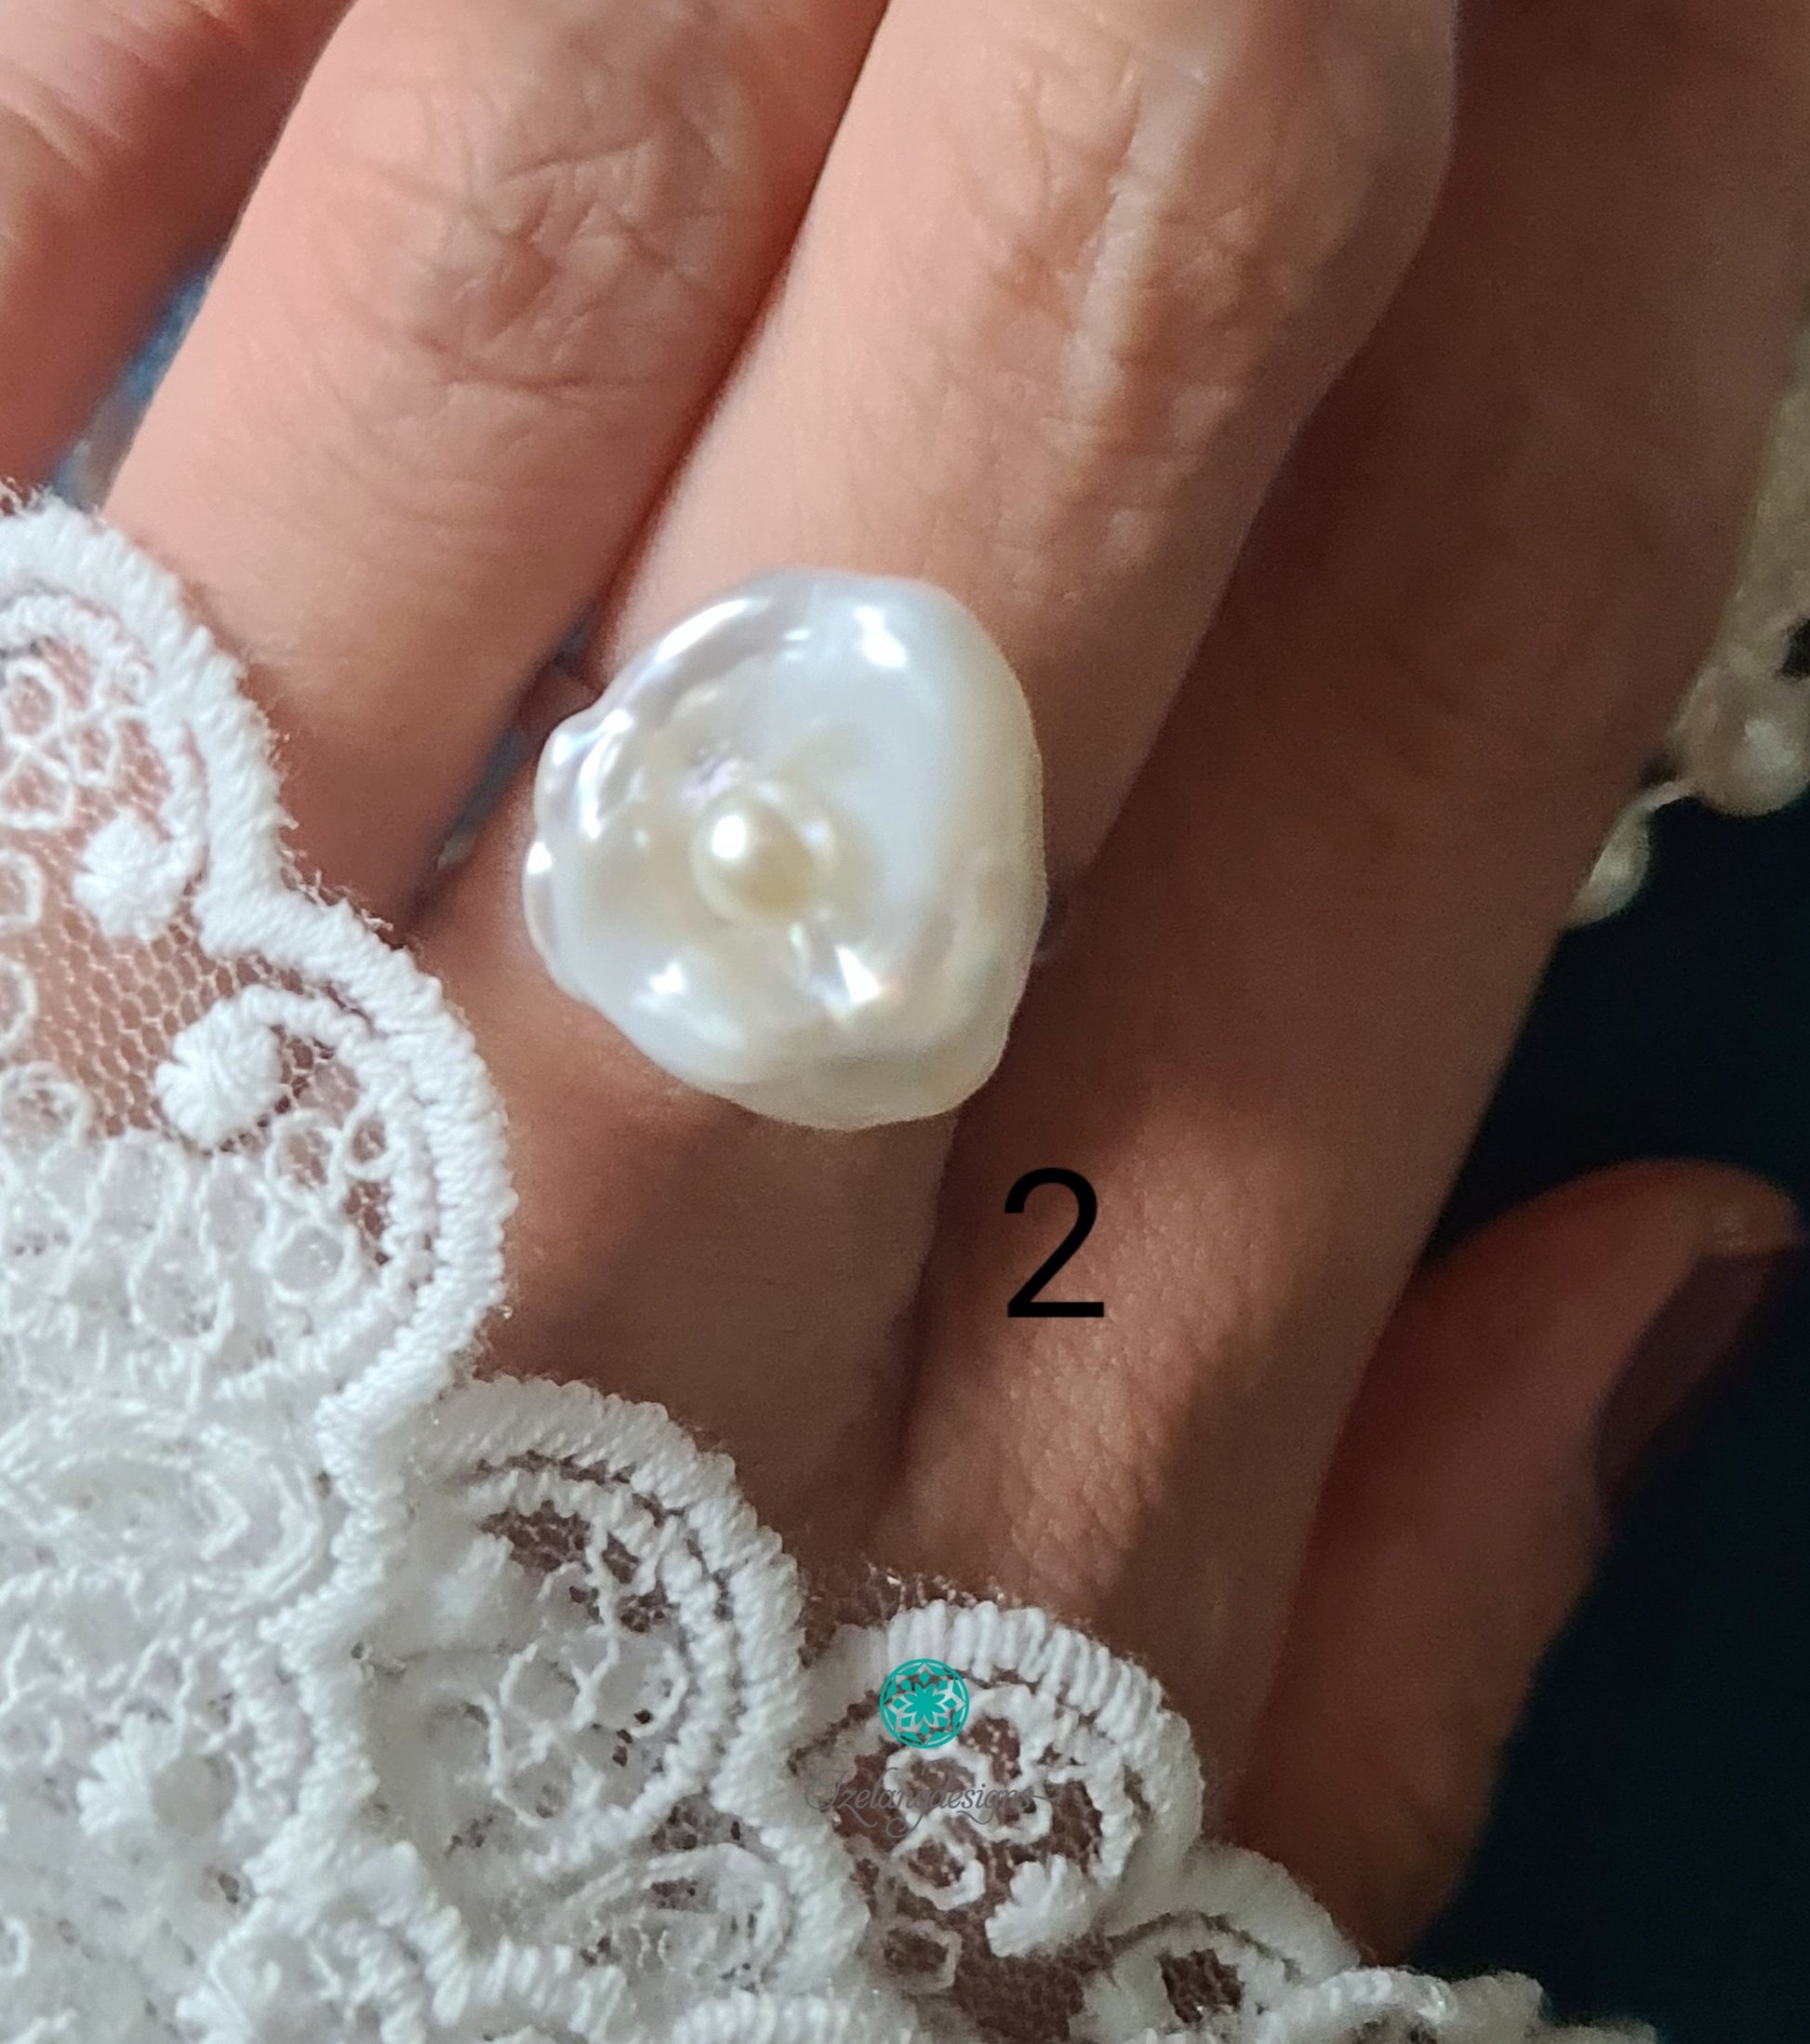 13-15mm Keshi Pearls with 4-5mm Round White Freshwater Pearls in FS Ring-RGM012